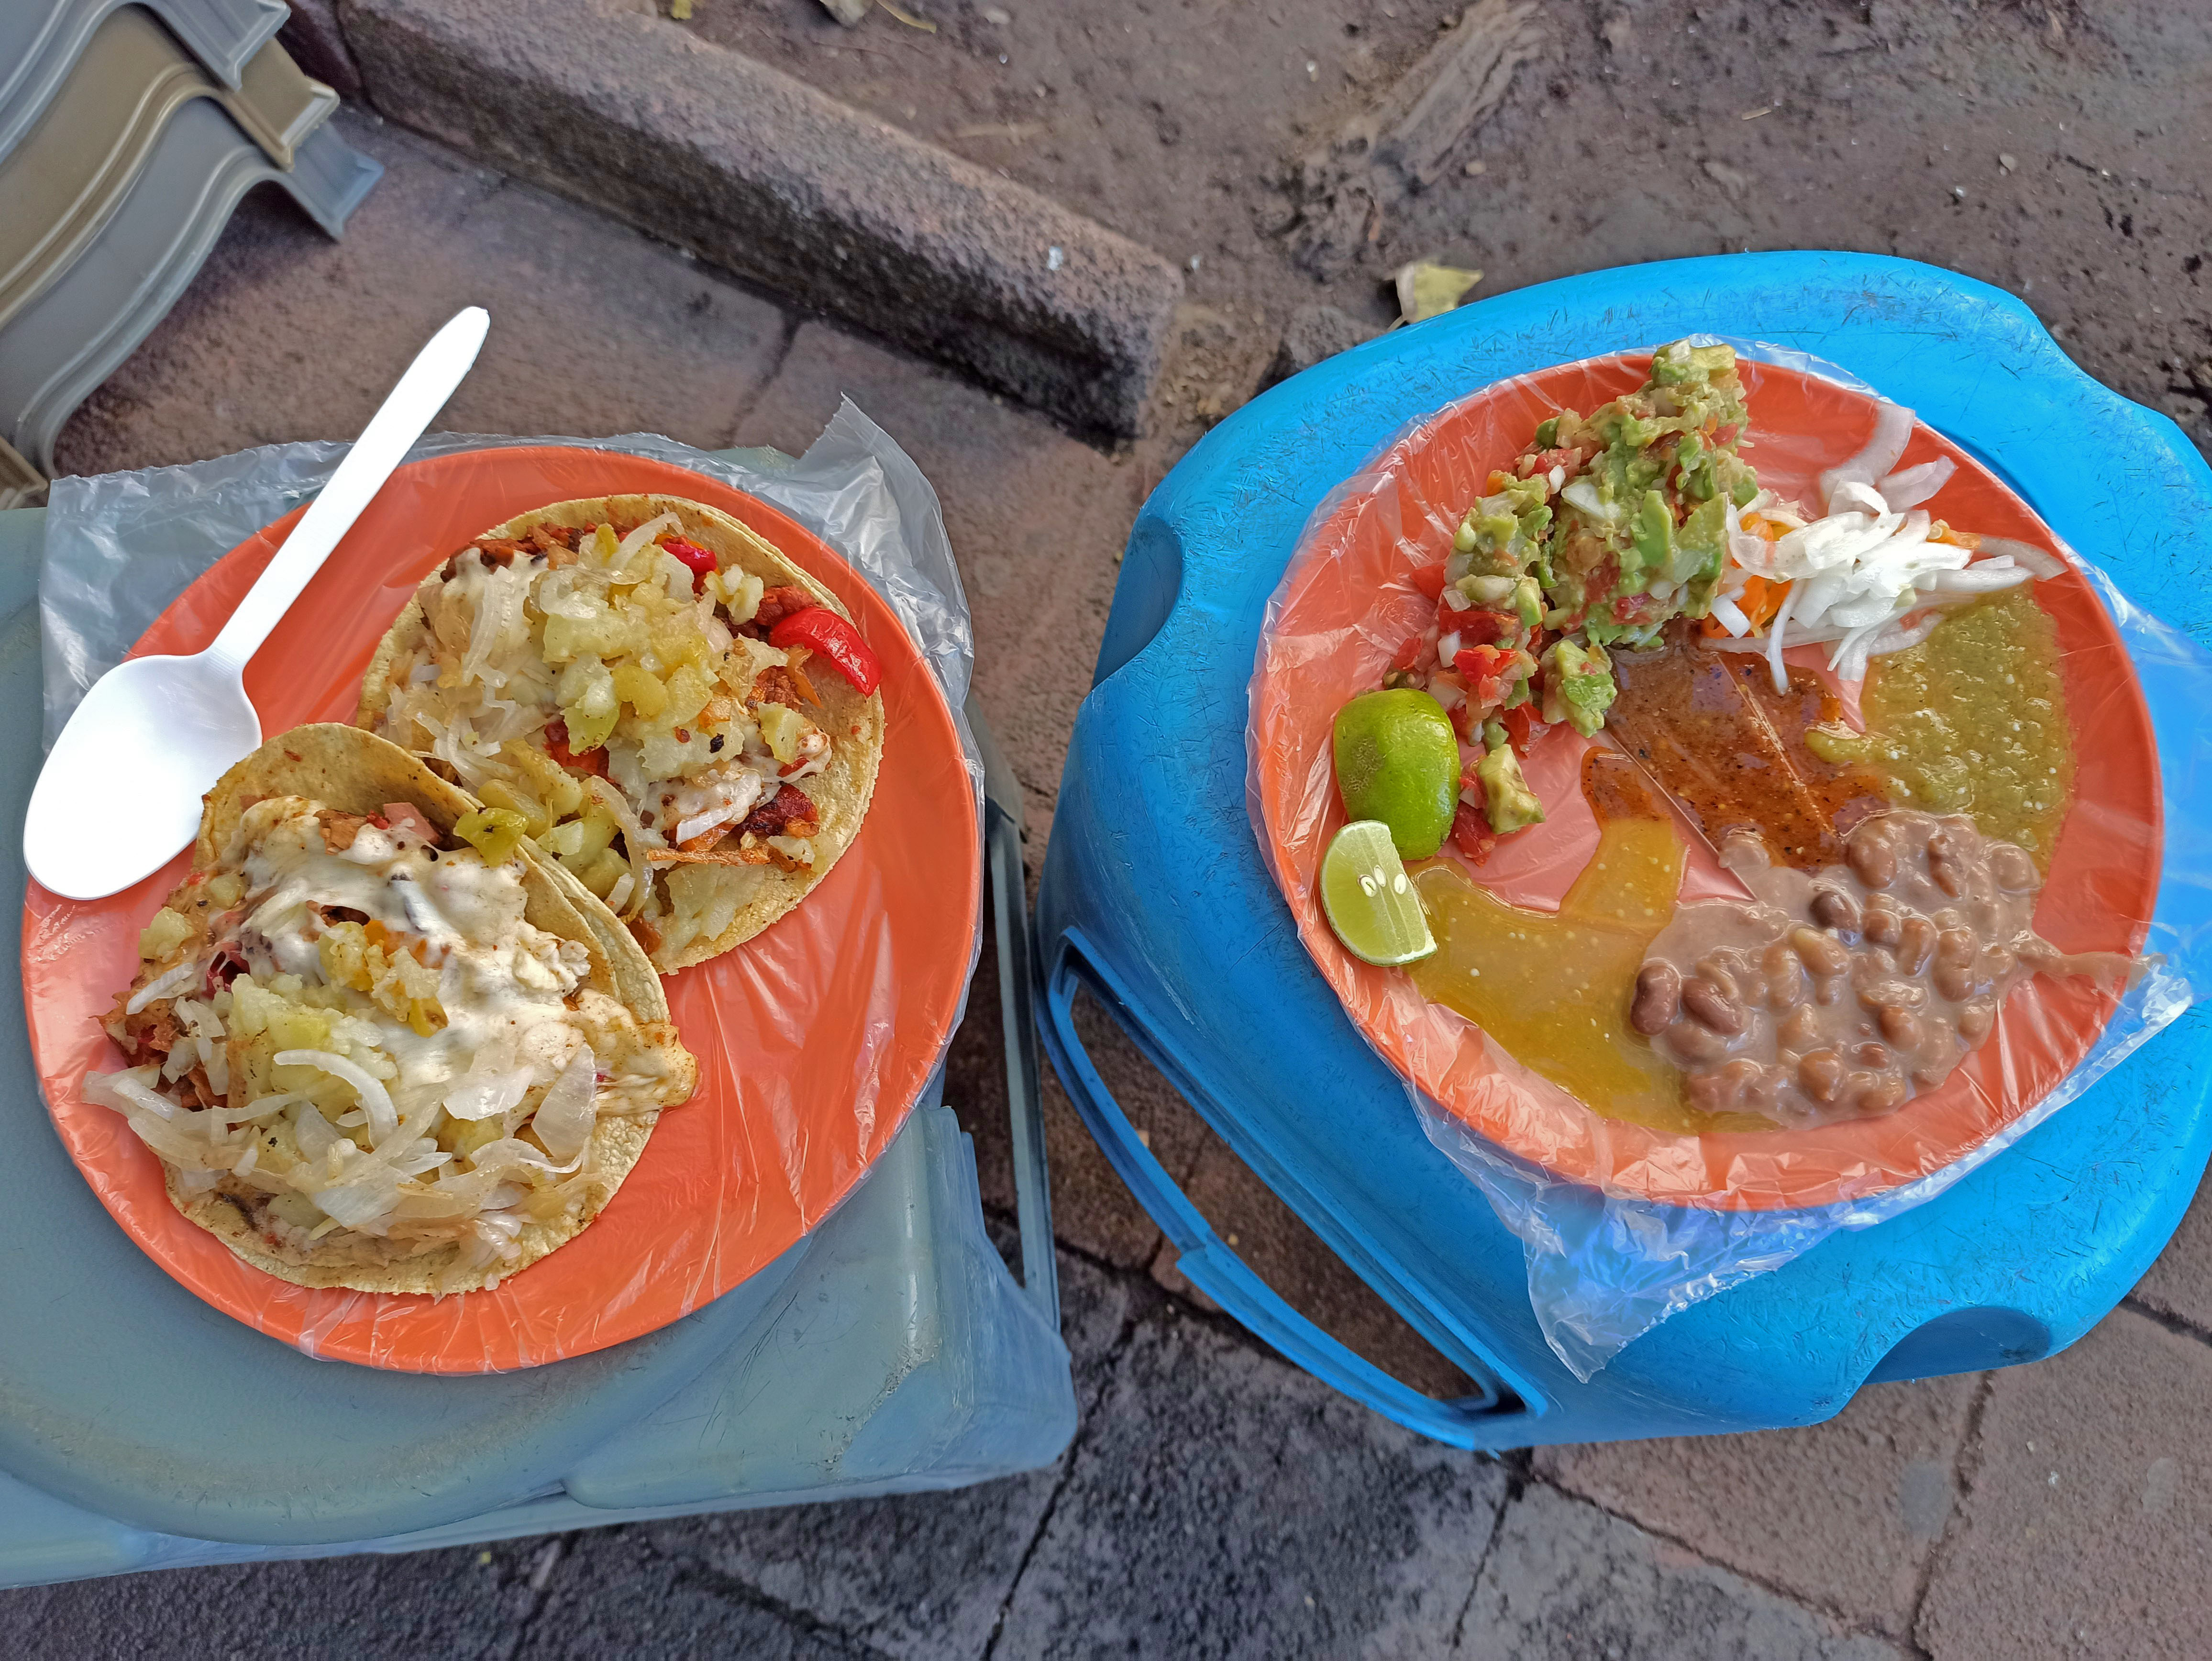 two plates of tacos on a concrete surface